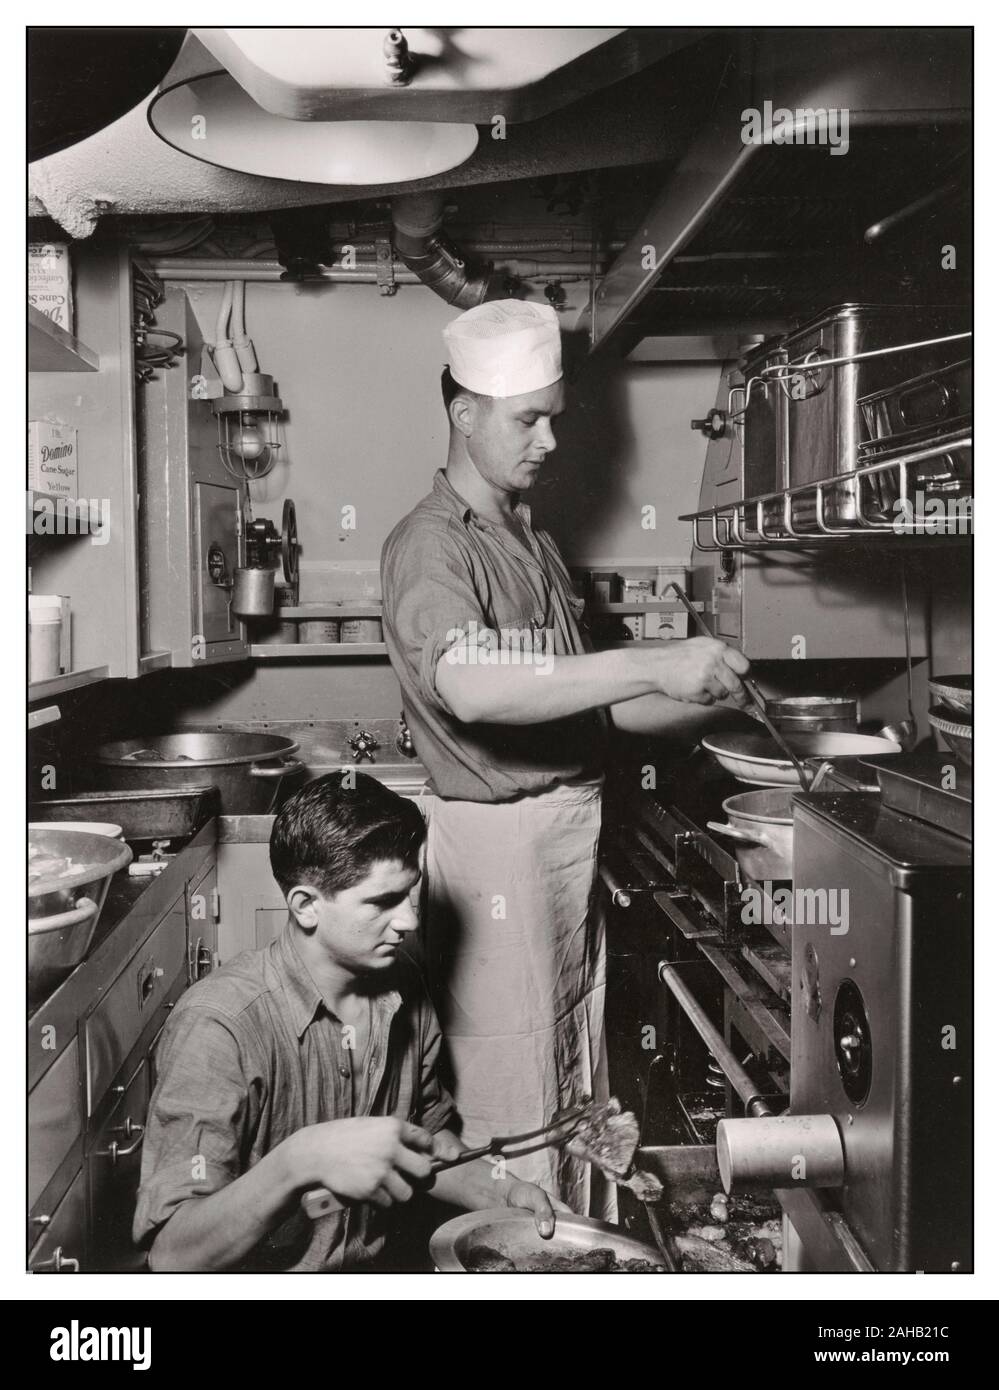 World War II USA American Submarine Life with cook aboard a submarine ladling out a meal with a new stainless steel utensil. August, 1943 Two soldiers preparing meal in submarine galley. military personnel Second World War WW2 American Navy Submarine Galley kitchen food preparation Stock Photo